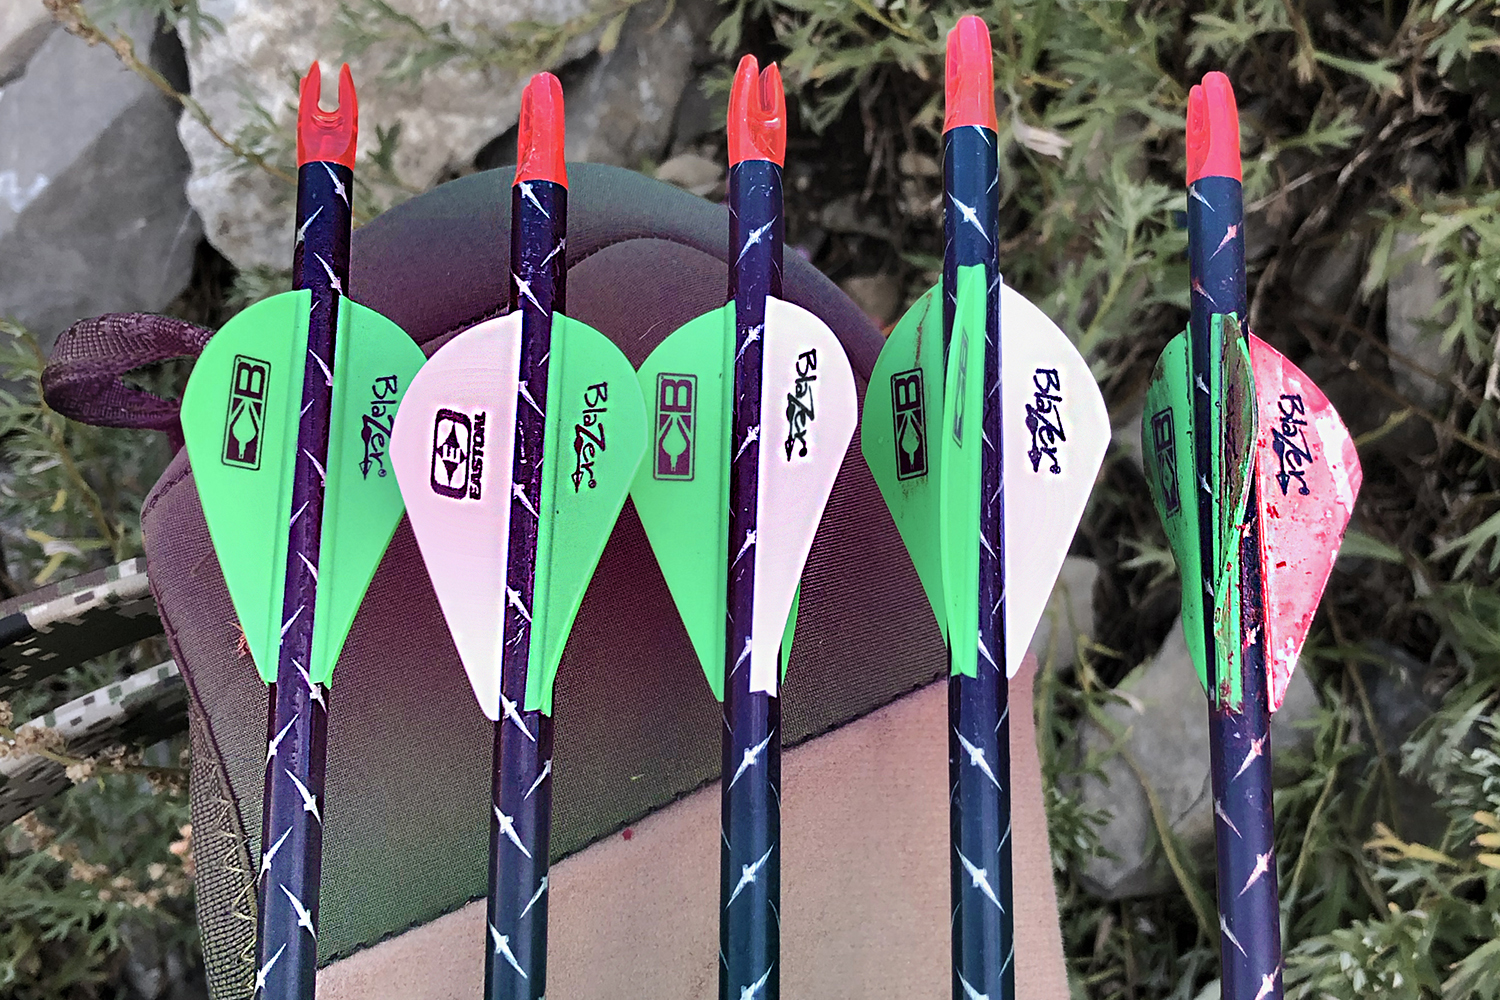 fletching end of arrows